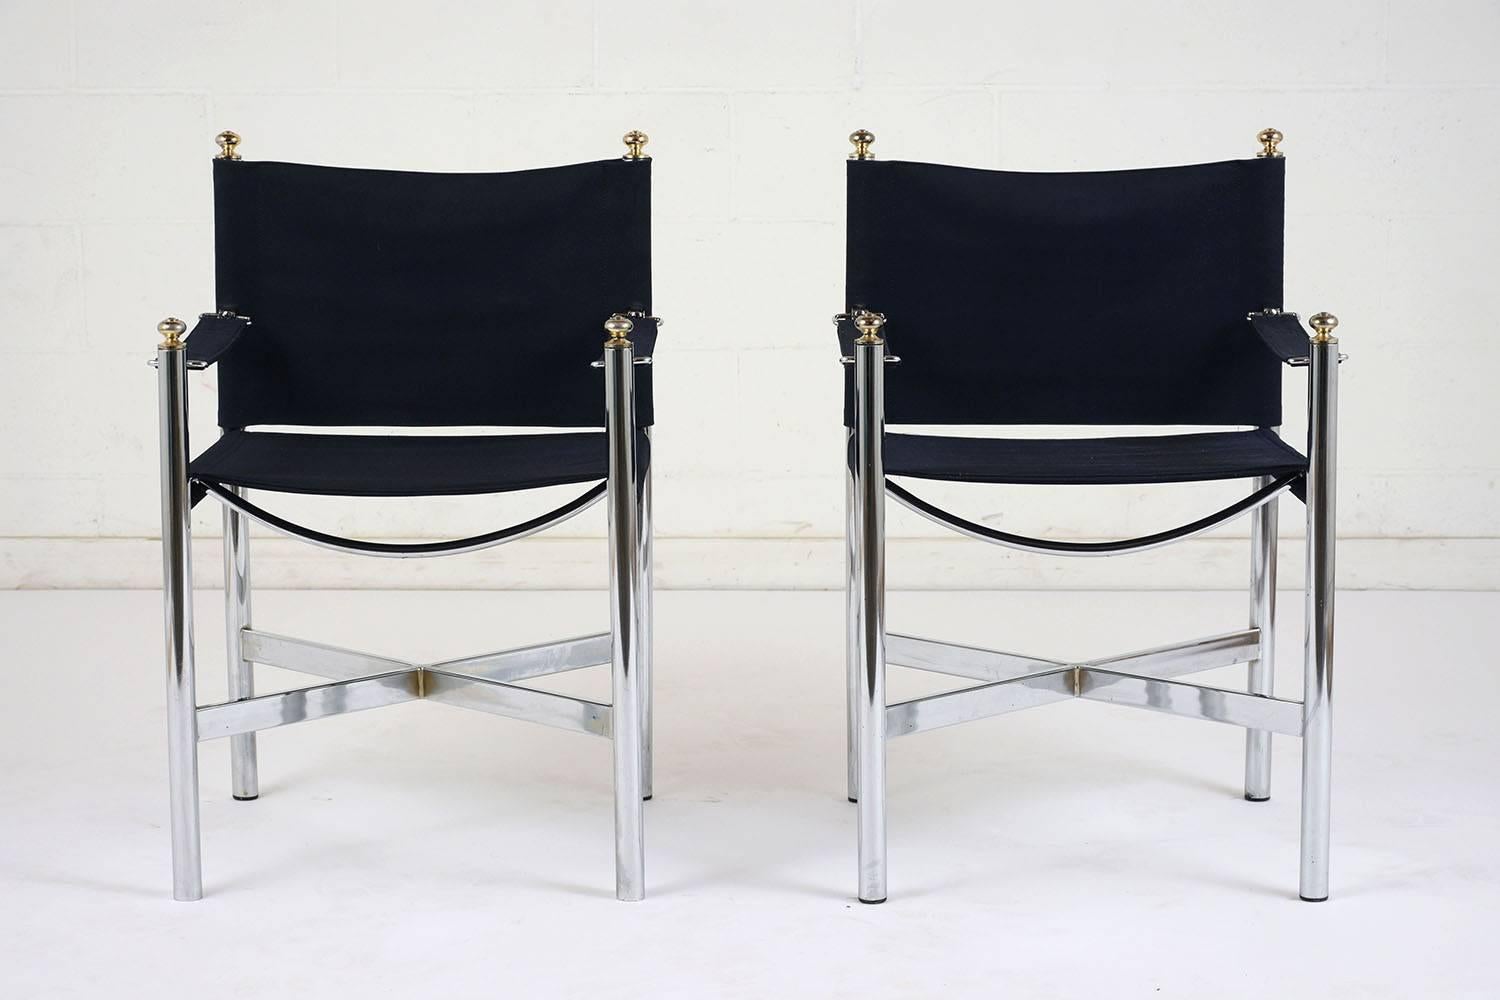 This pair of 1960s Mid-Century Modern lounge chairs feature a chrome-plated steel frame with brass finial accents. The frame has simple circular legs with an X-shaped stretcher bar and a curved seat bar. The seats are upholstered in a cobalt blue